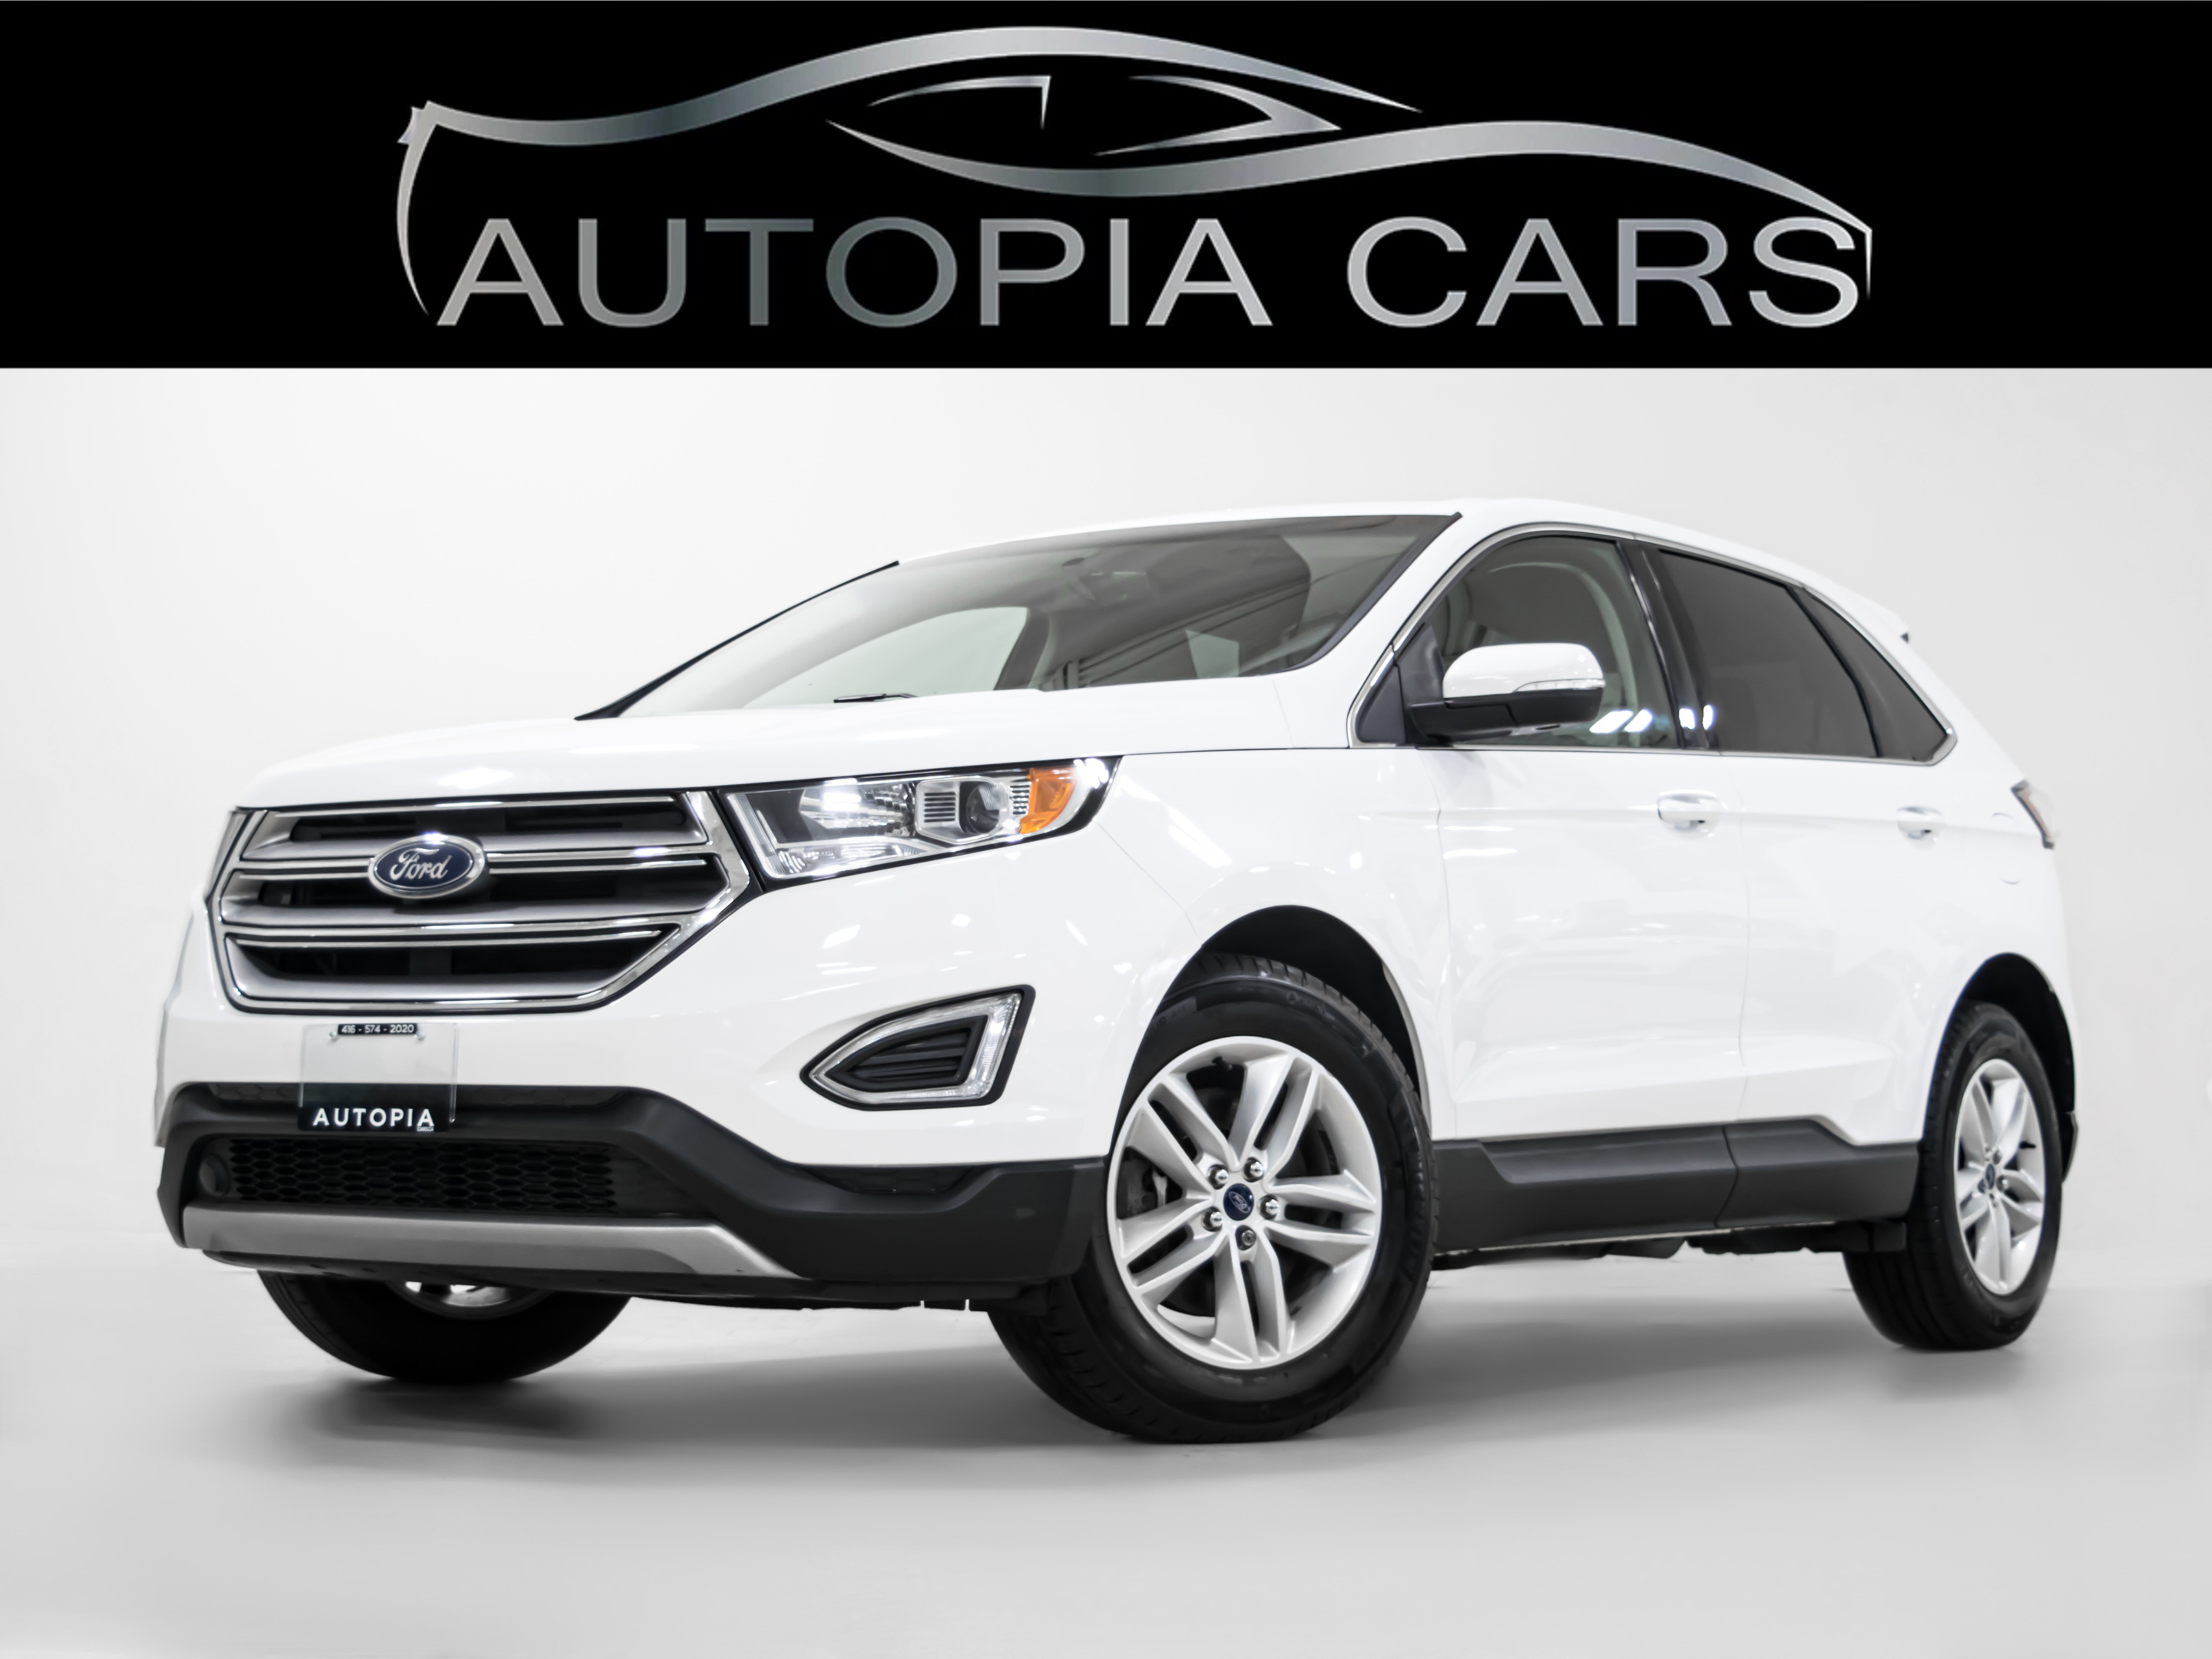 2018 Ford Edge SEL AWD , SYNC EQUIPPED